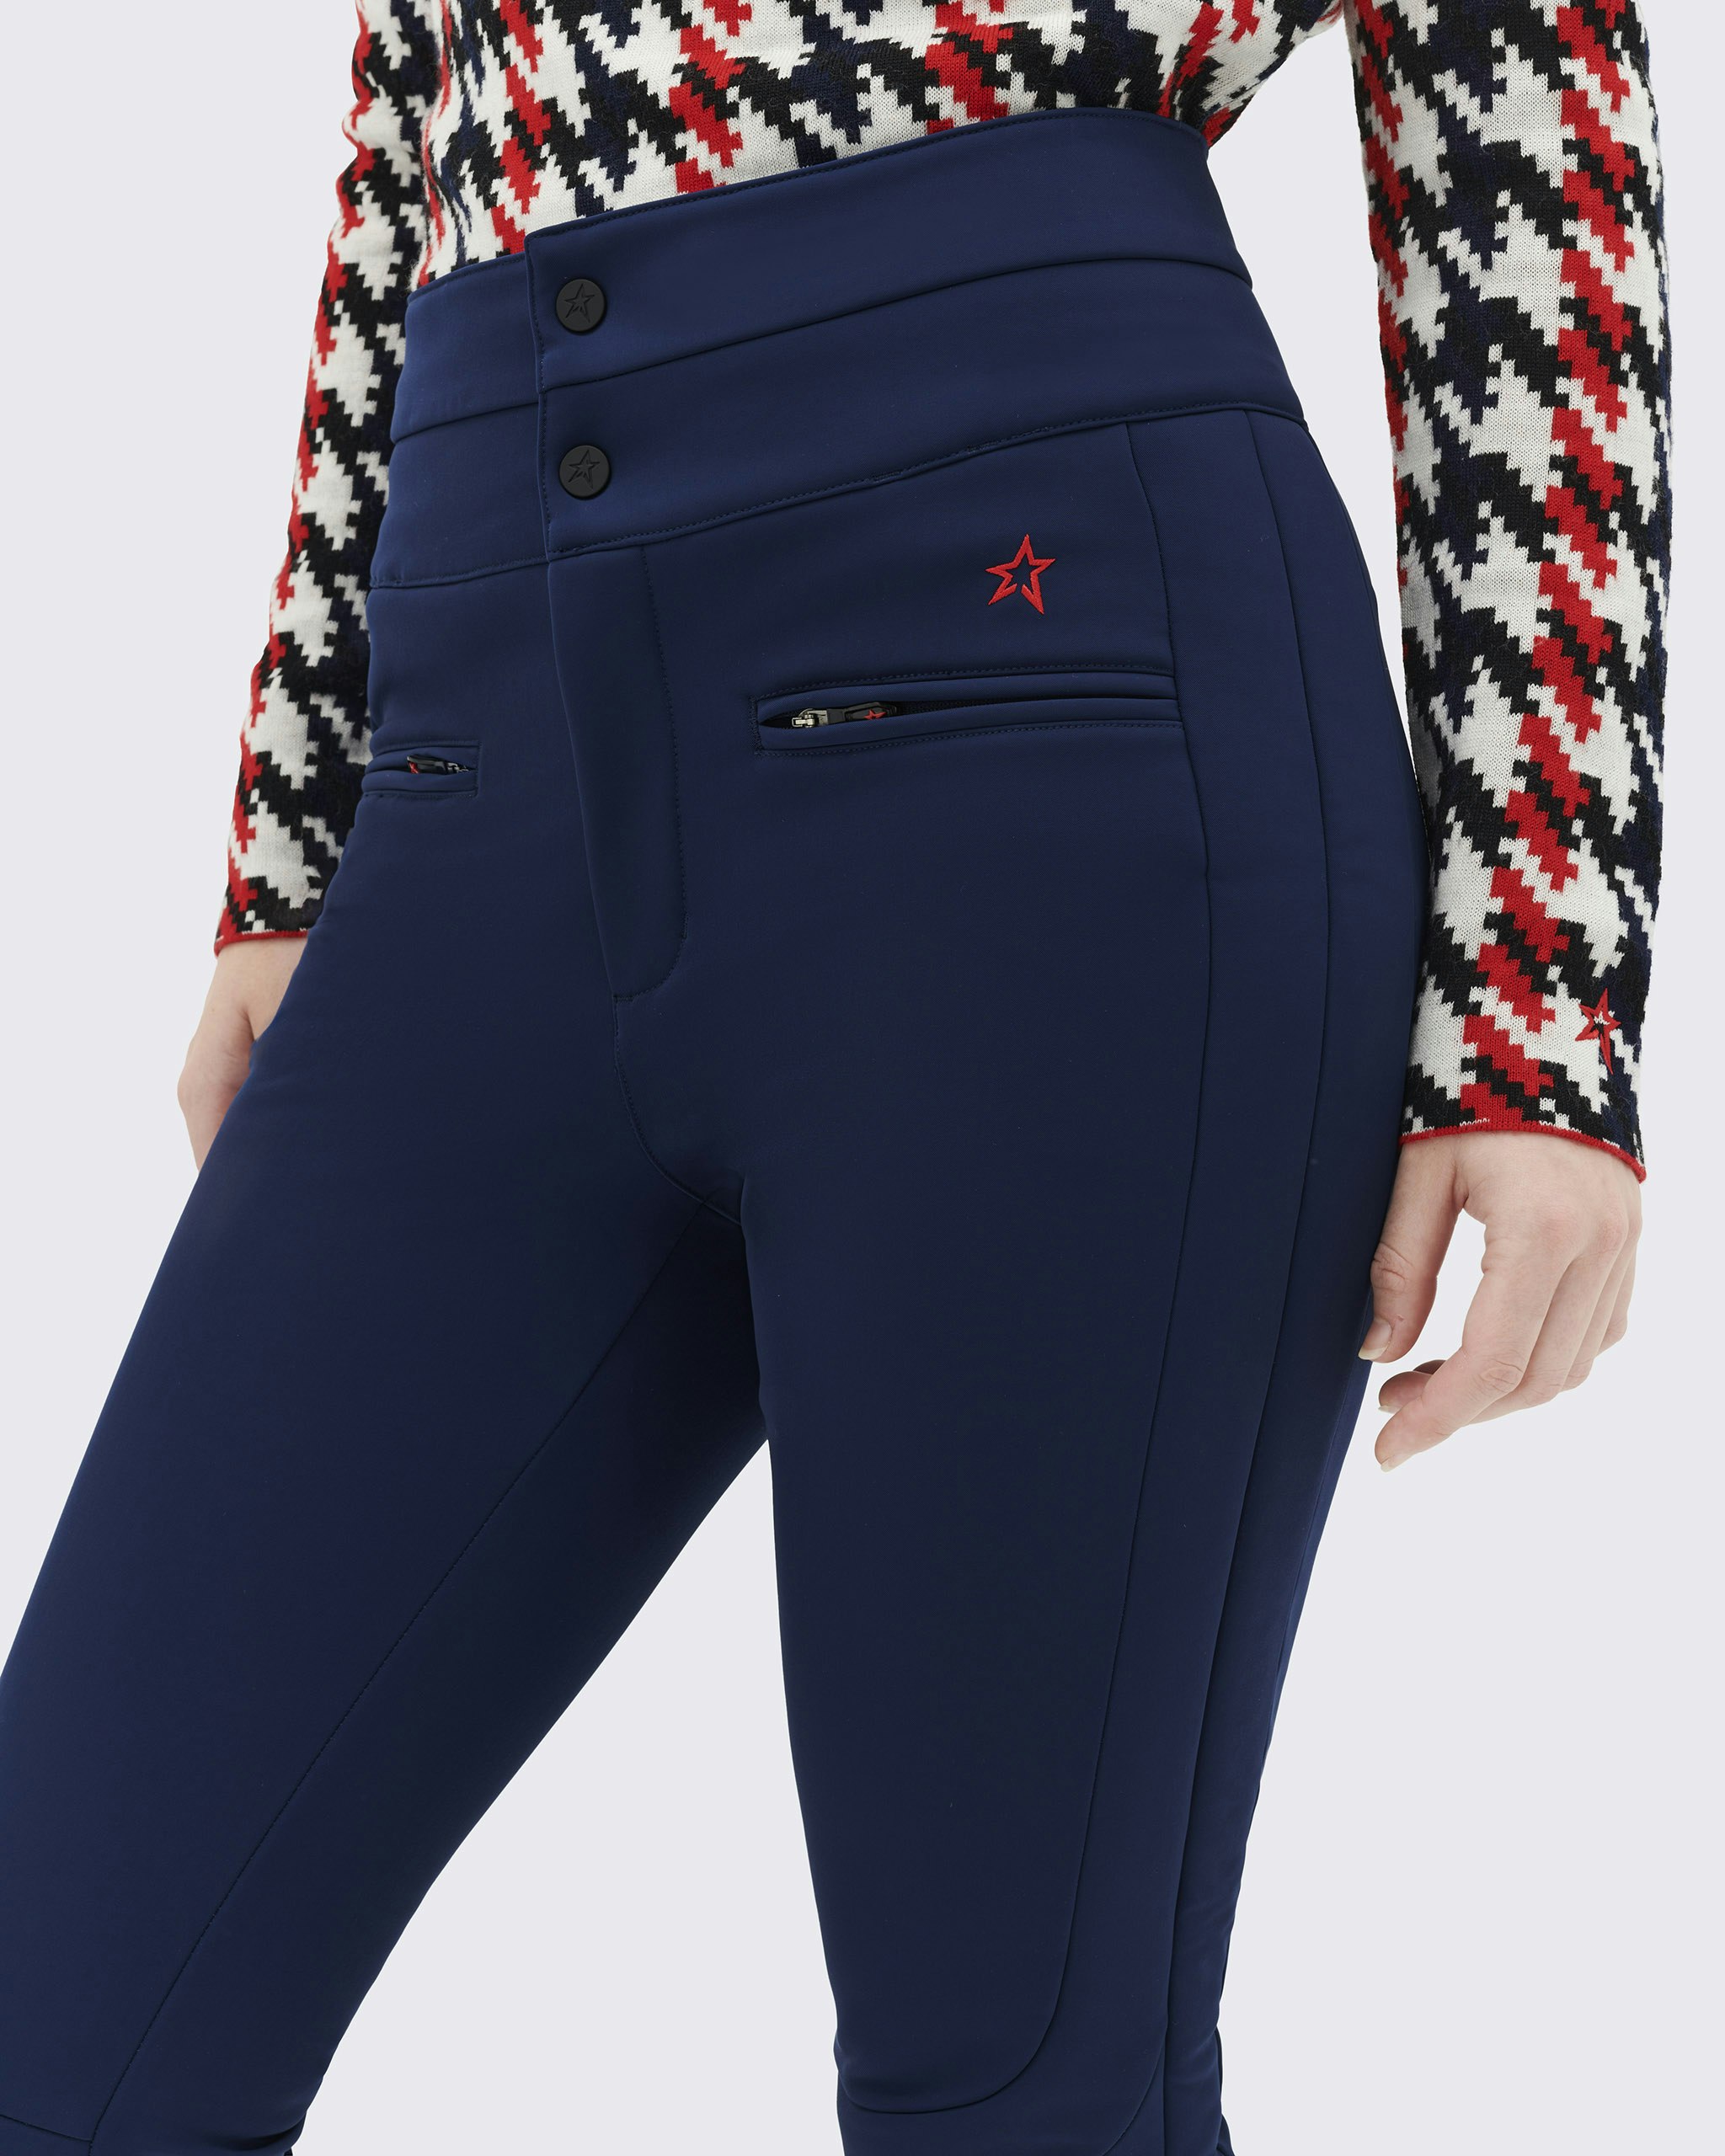 Aurora High Waist Flare Pant in Navy by Perfect Moment